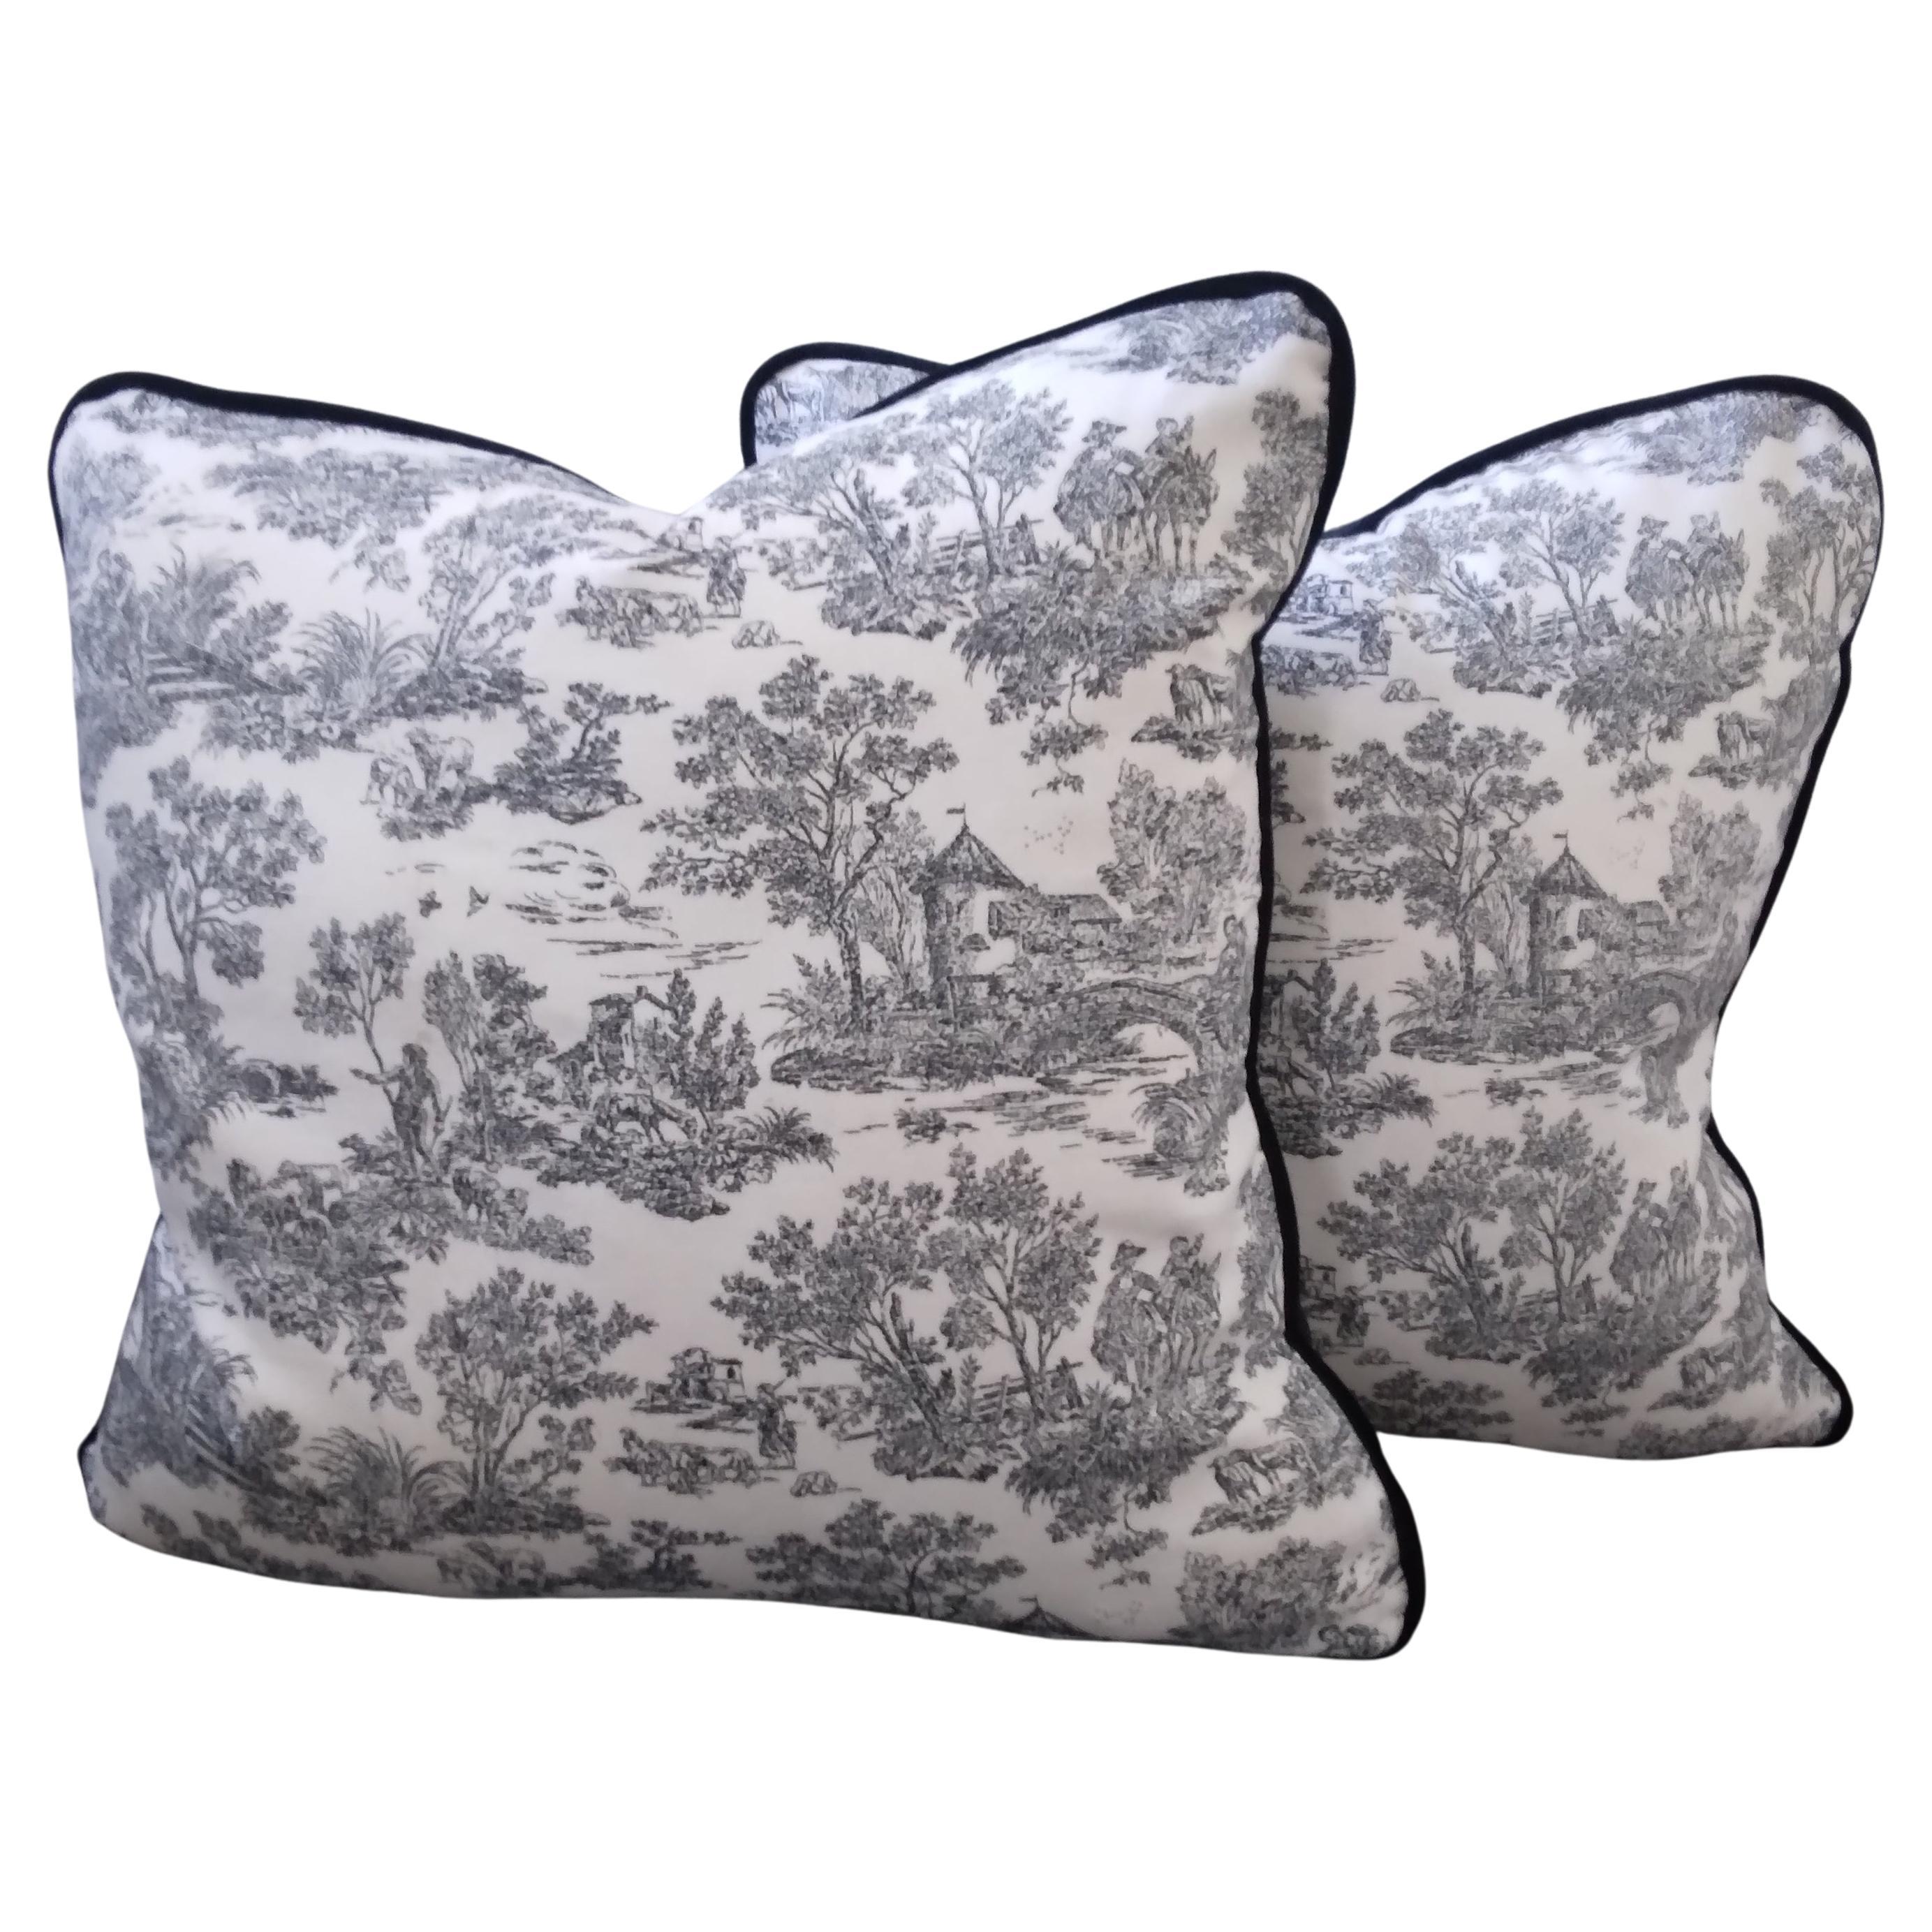 Black and White Toile Print Pillows with Black Velvet Backing - a pair